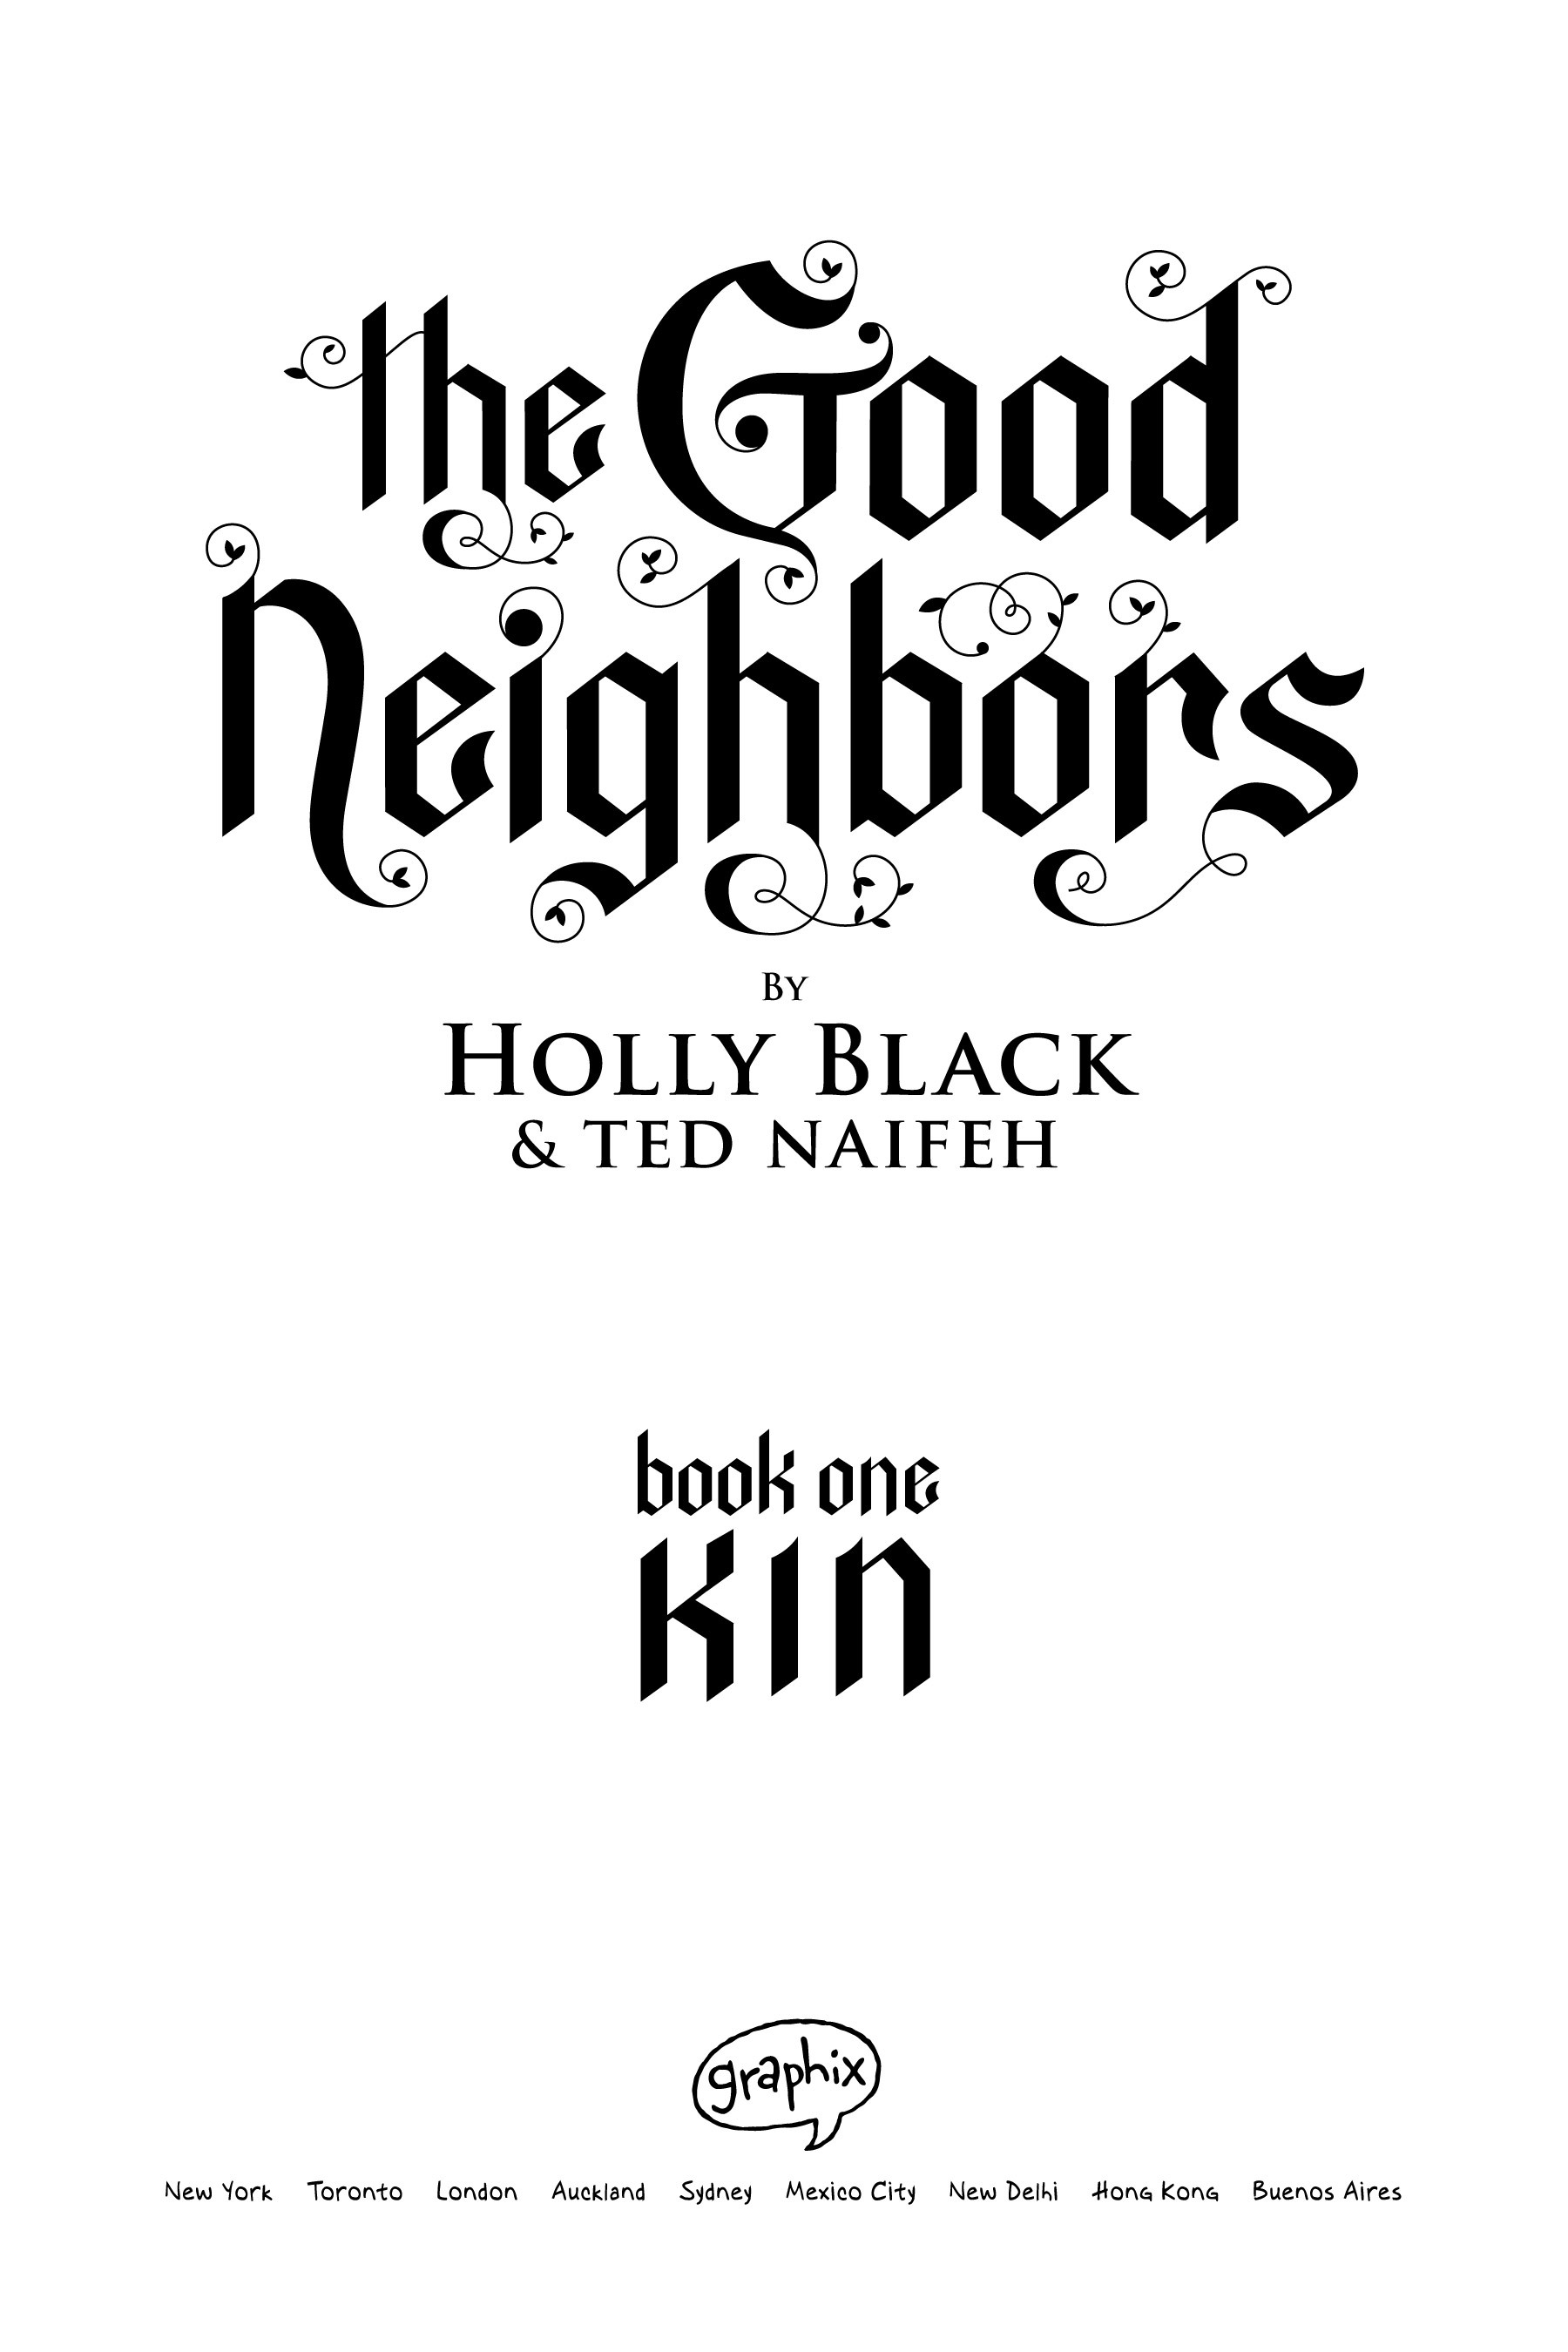 Read online The Good Neighbors comic -  Issue # TPB 1 - 3